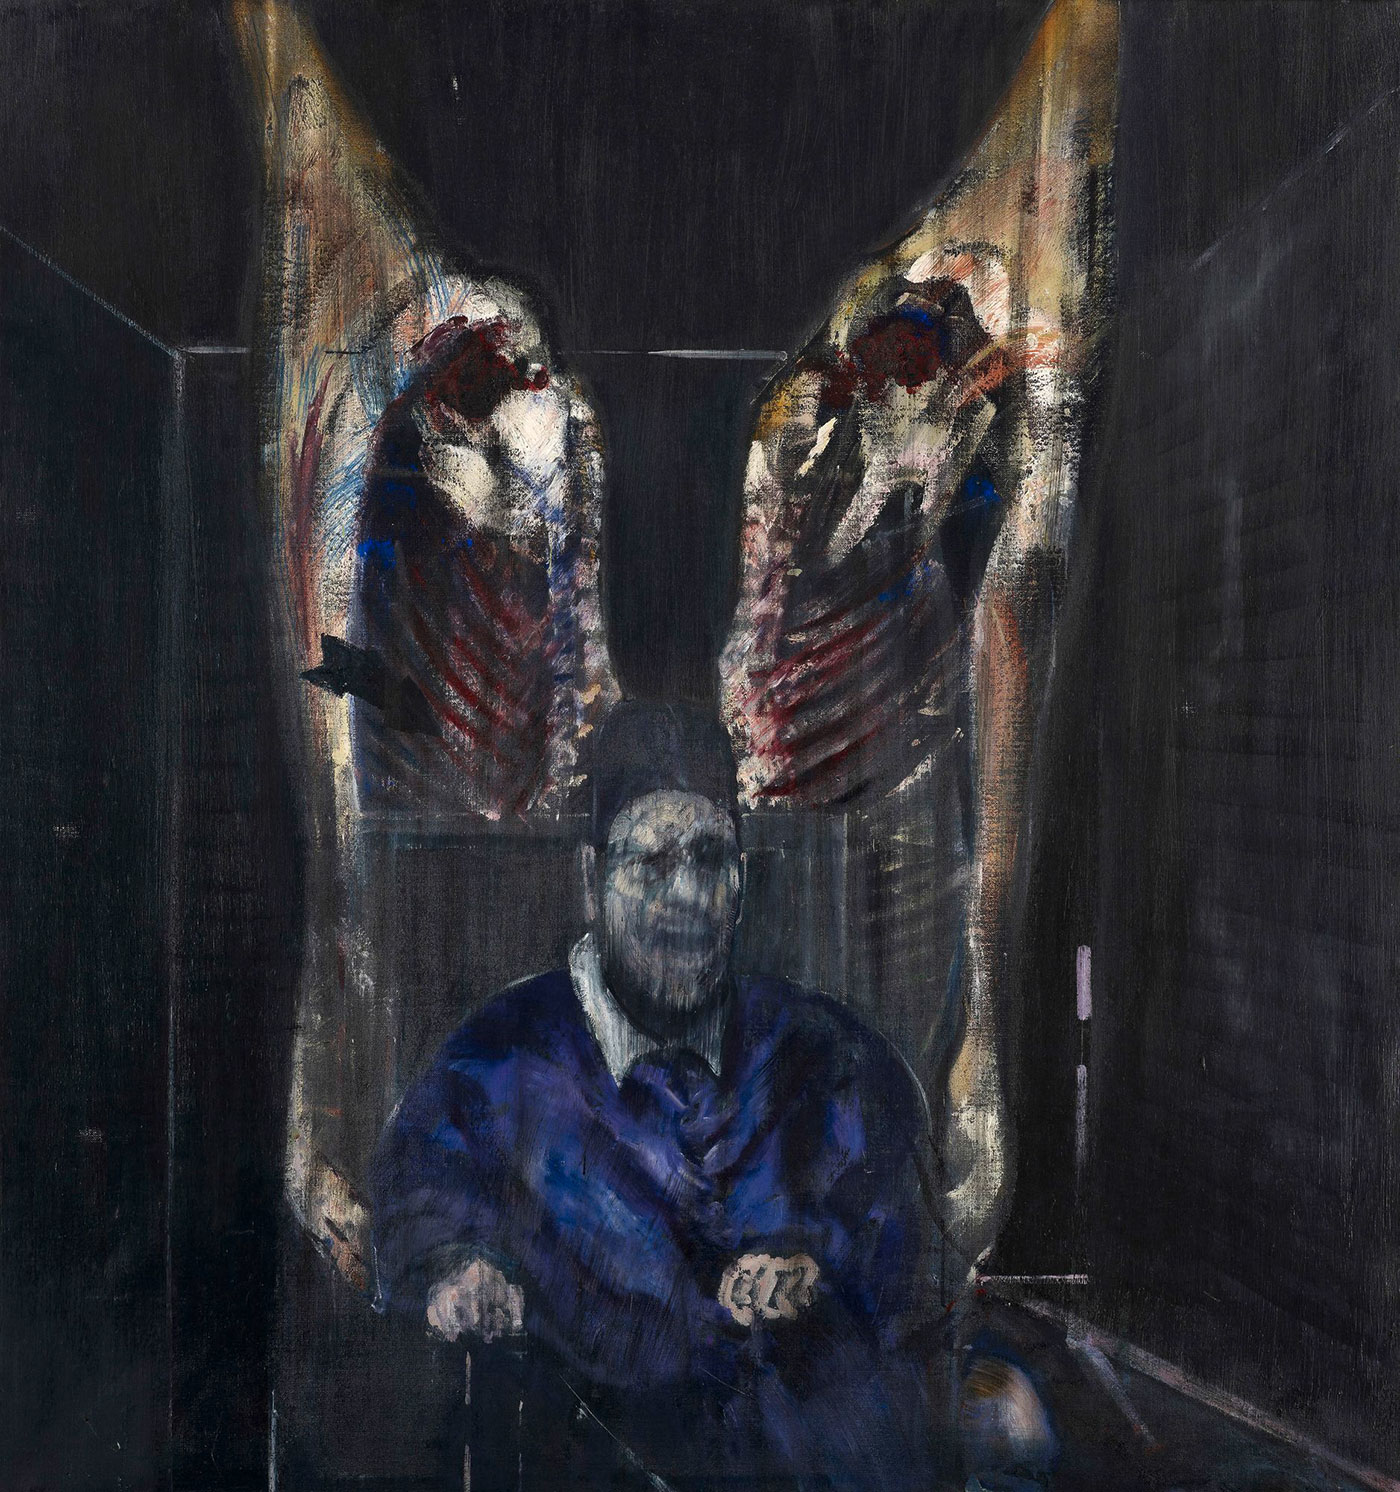 https://darkartmovement.com/wp-content/uploads/2018/08/Francis-Bacon-Figure-with-meat.jpg